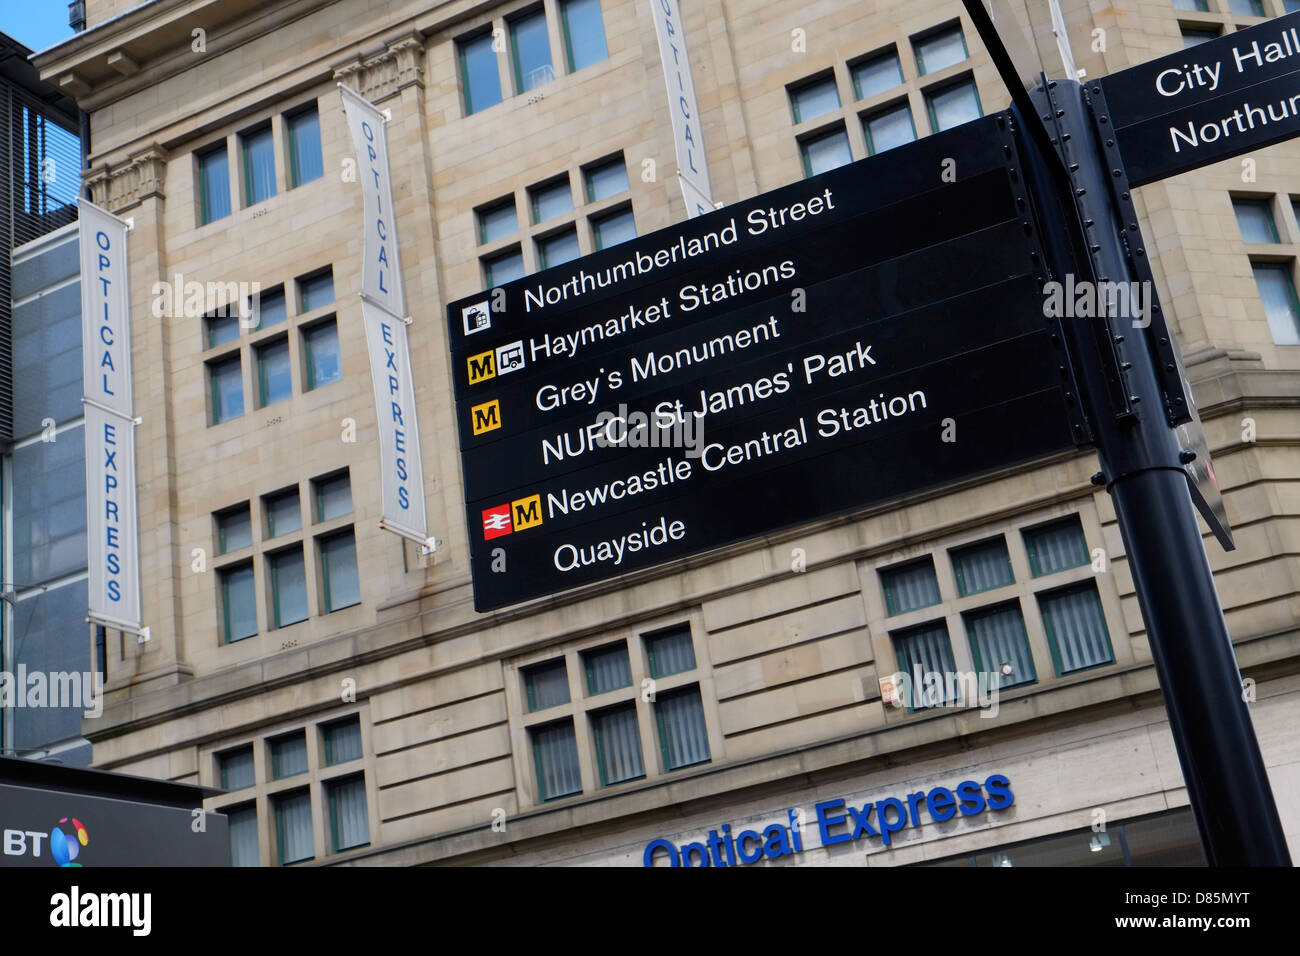 A street signpost on Northumberland Street in Newcastle Upon Tyne. Stock Photo